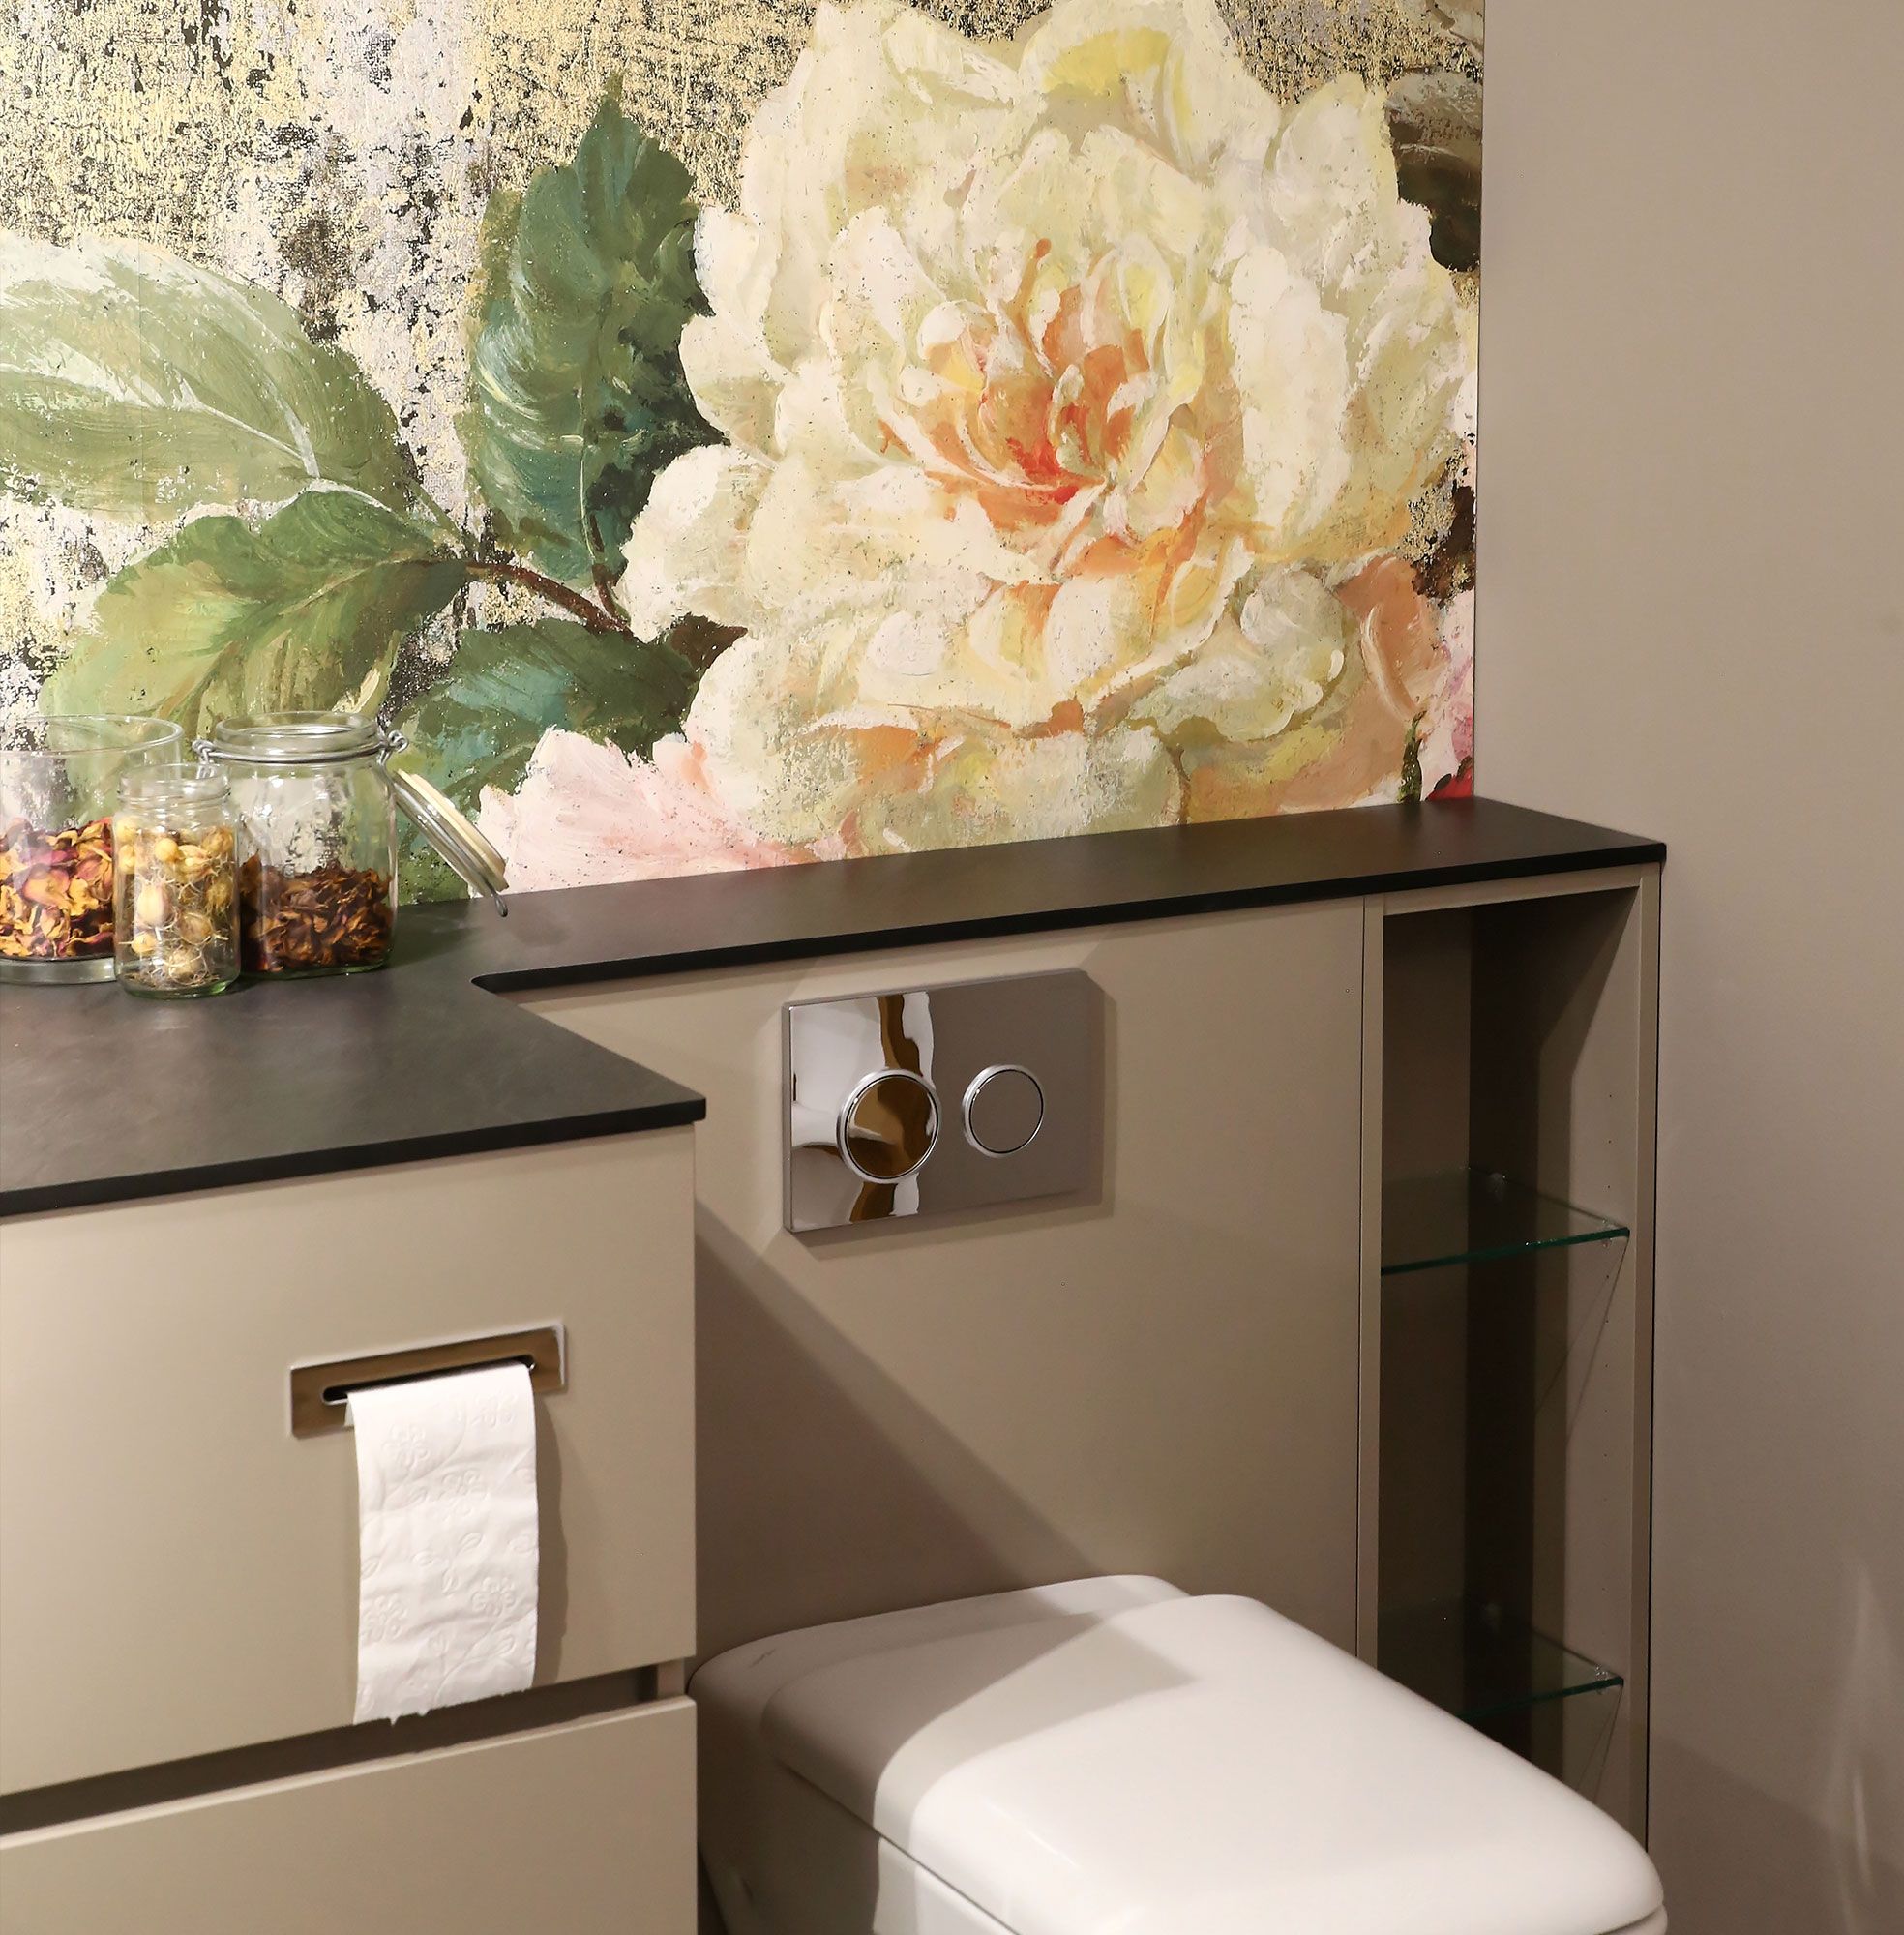 Bathroom-wallpaper-with-flowers